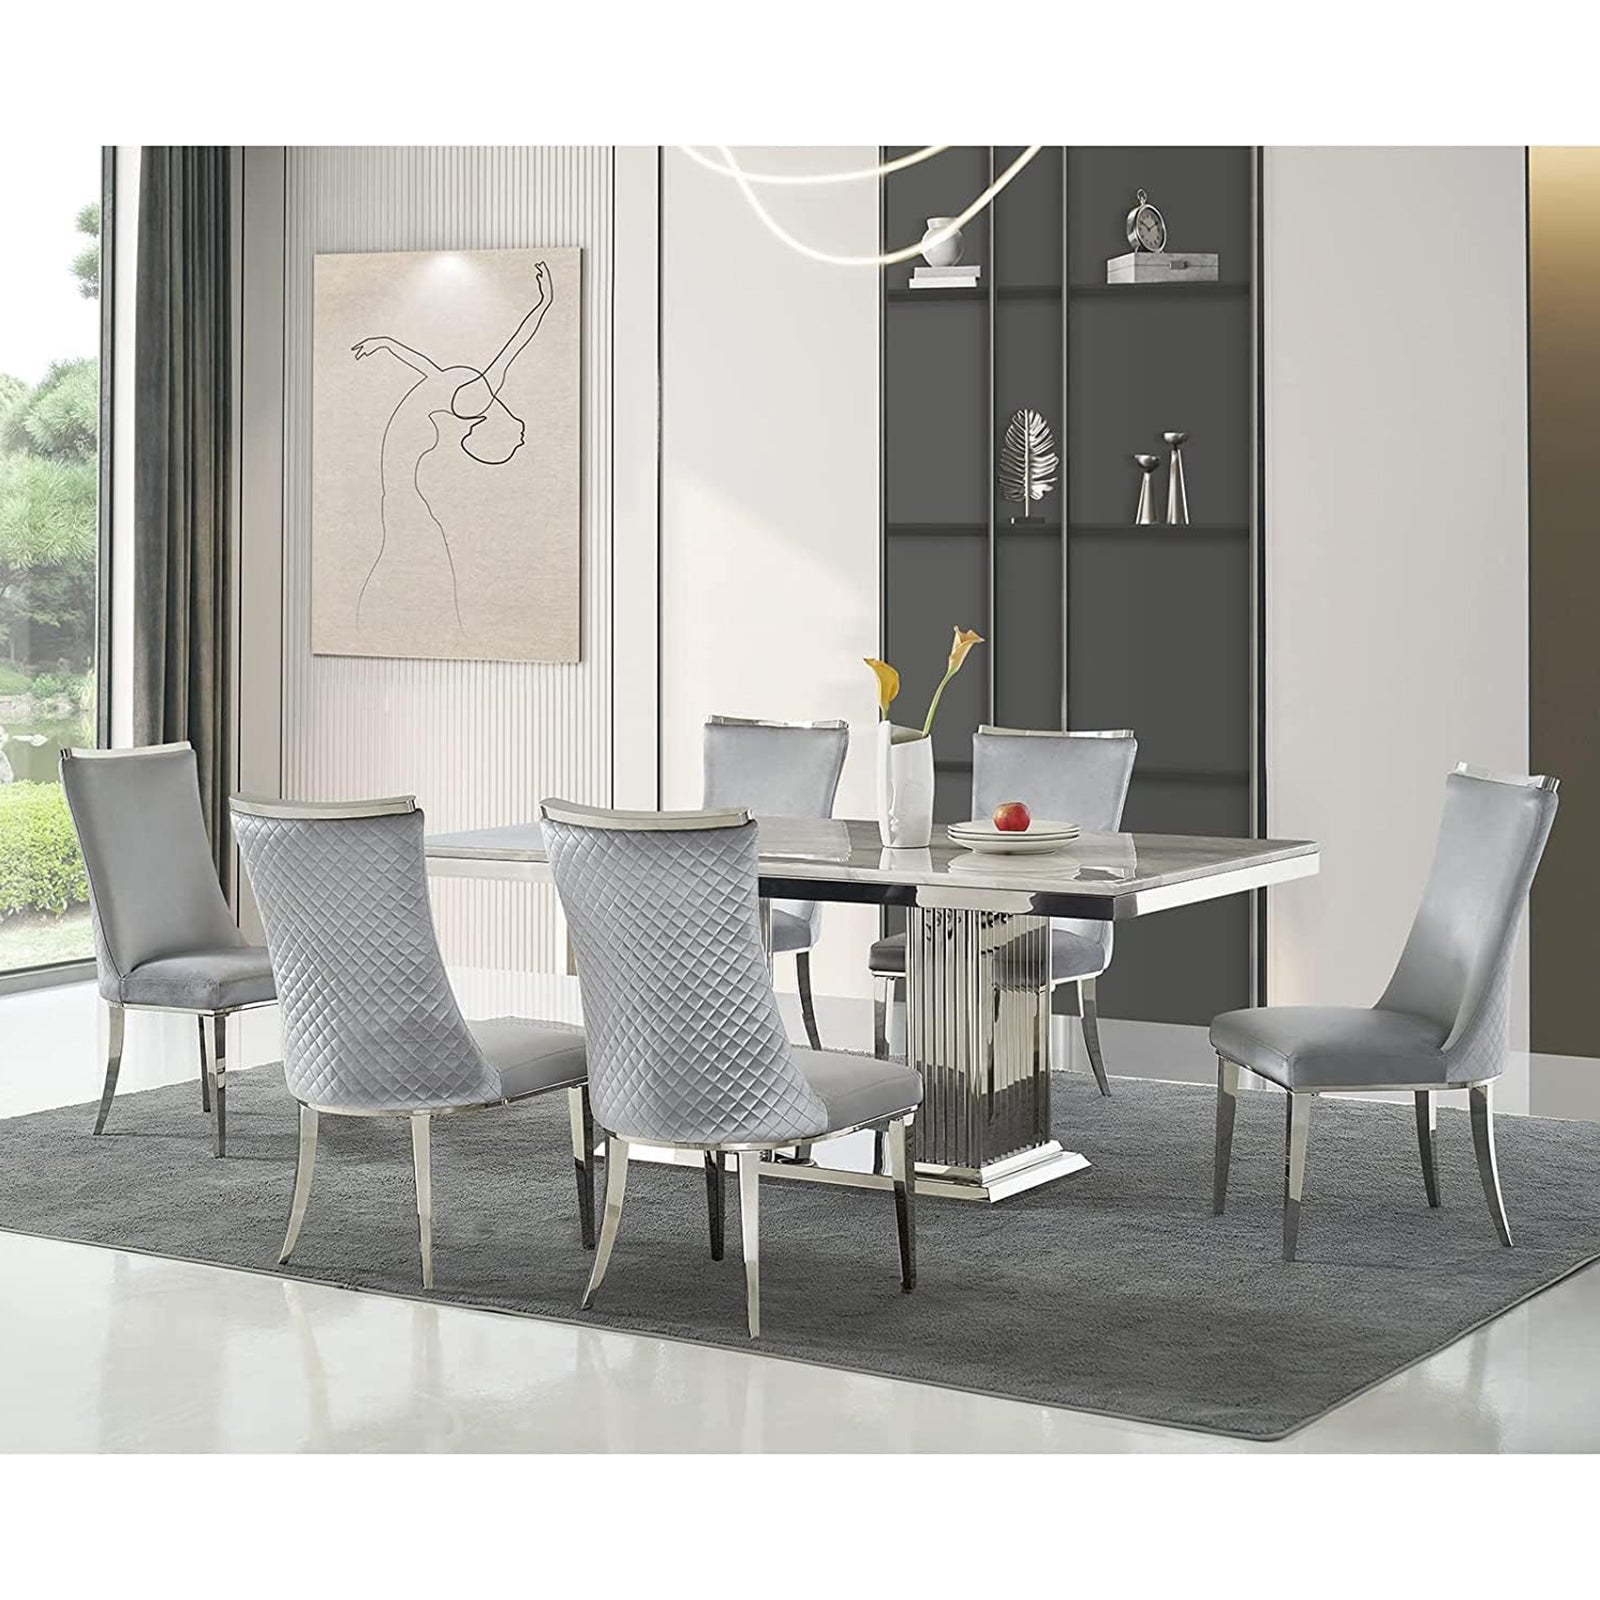 Light gray Velvet Dining Chairs | Reticulate Texture Back| Silver Metal Legs | C138